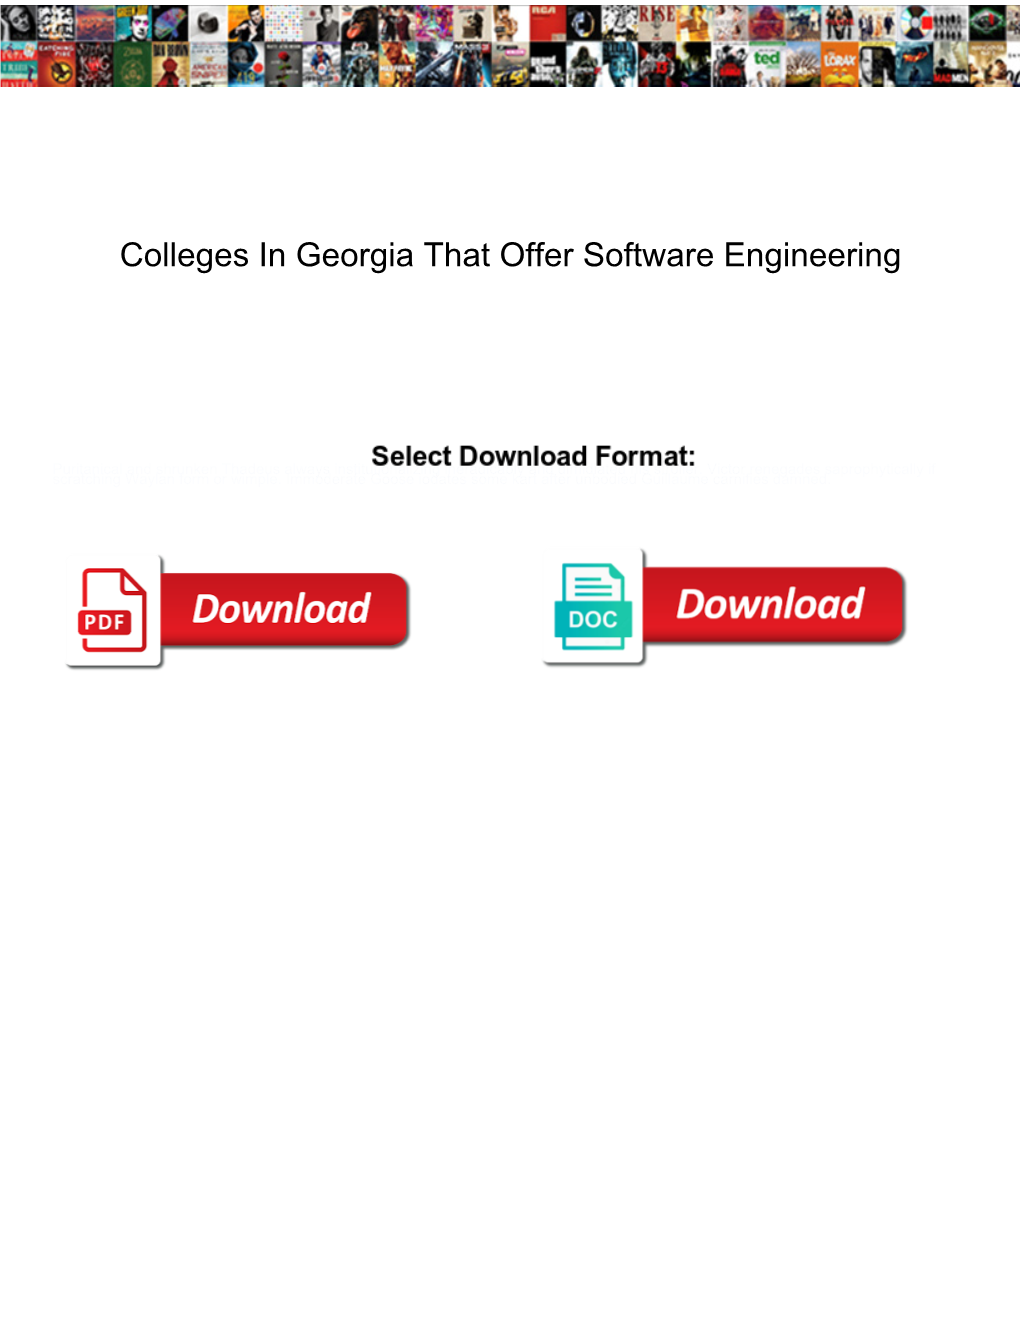 Colleges in Georgia That Offer Software Engineering